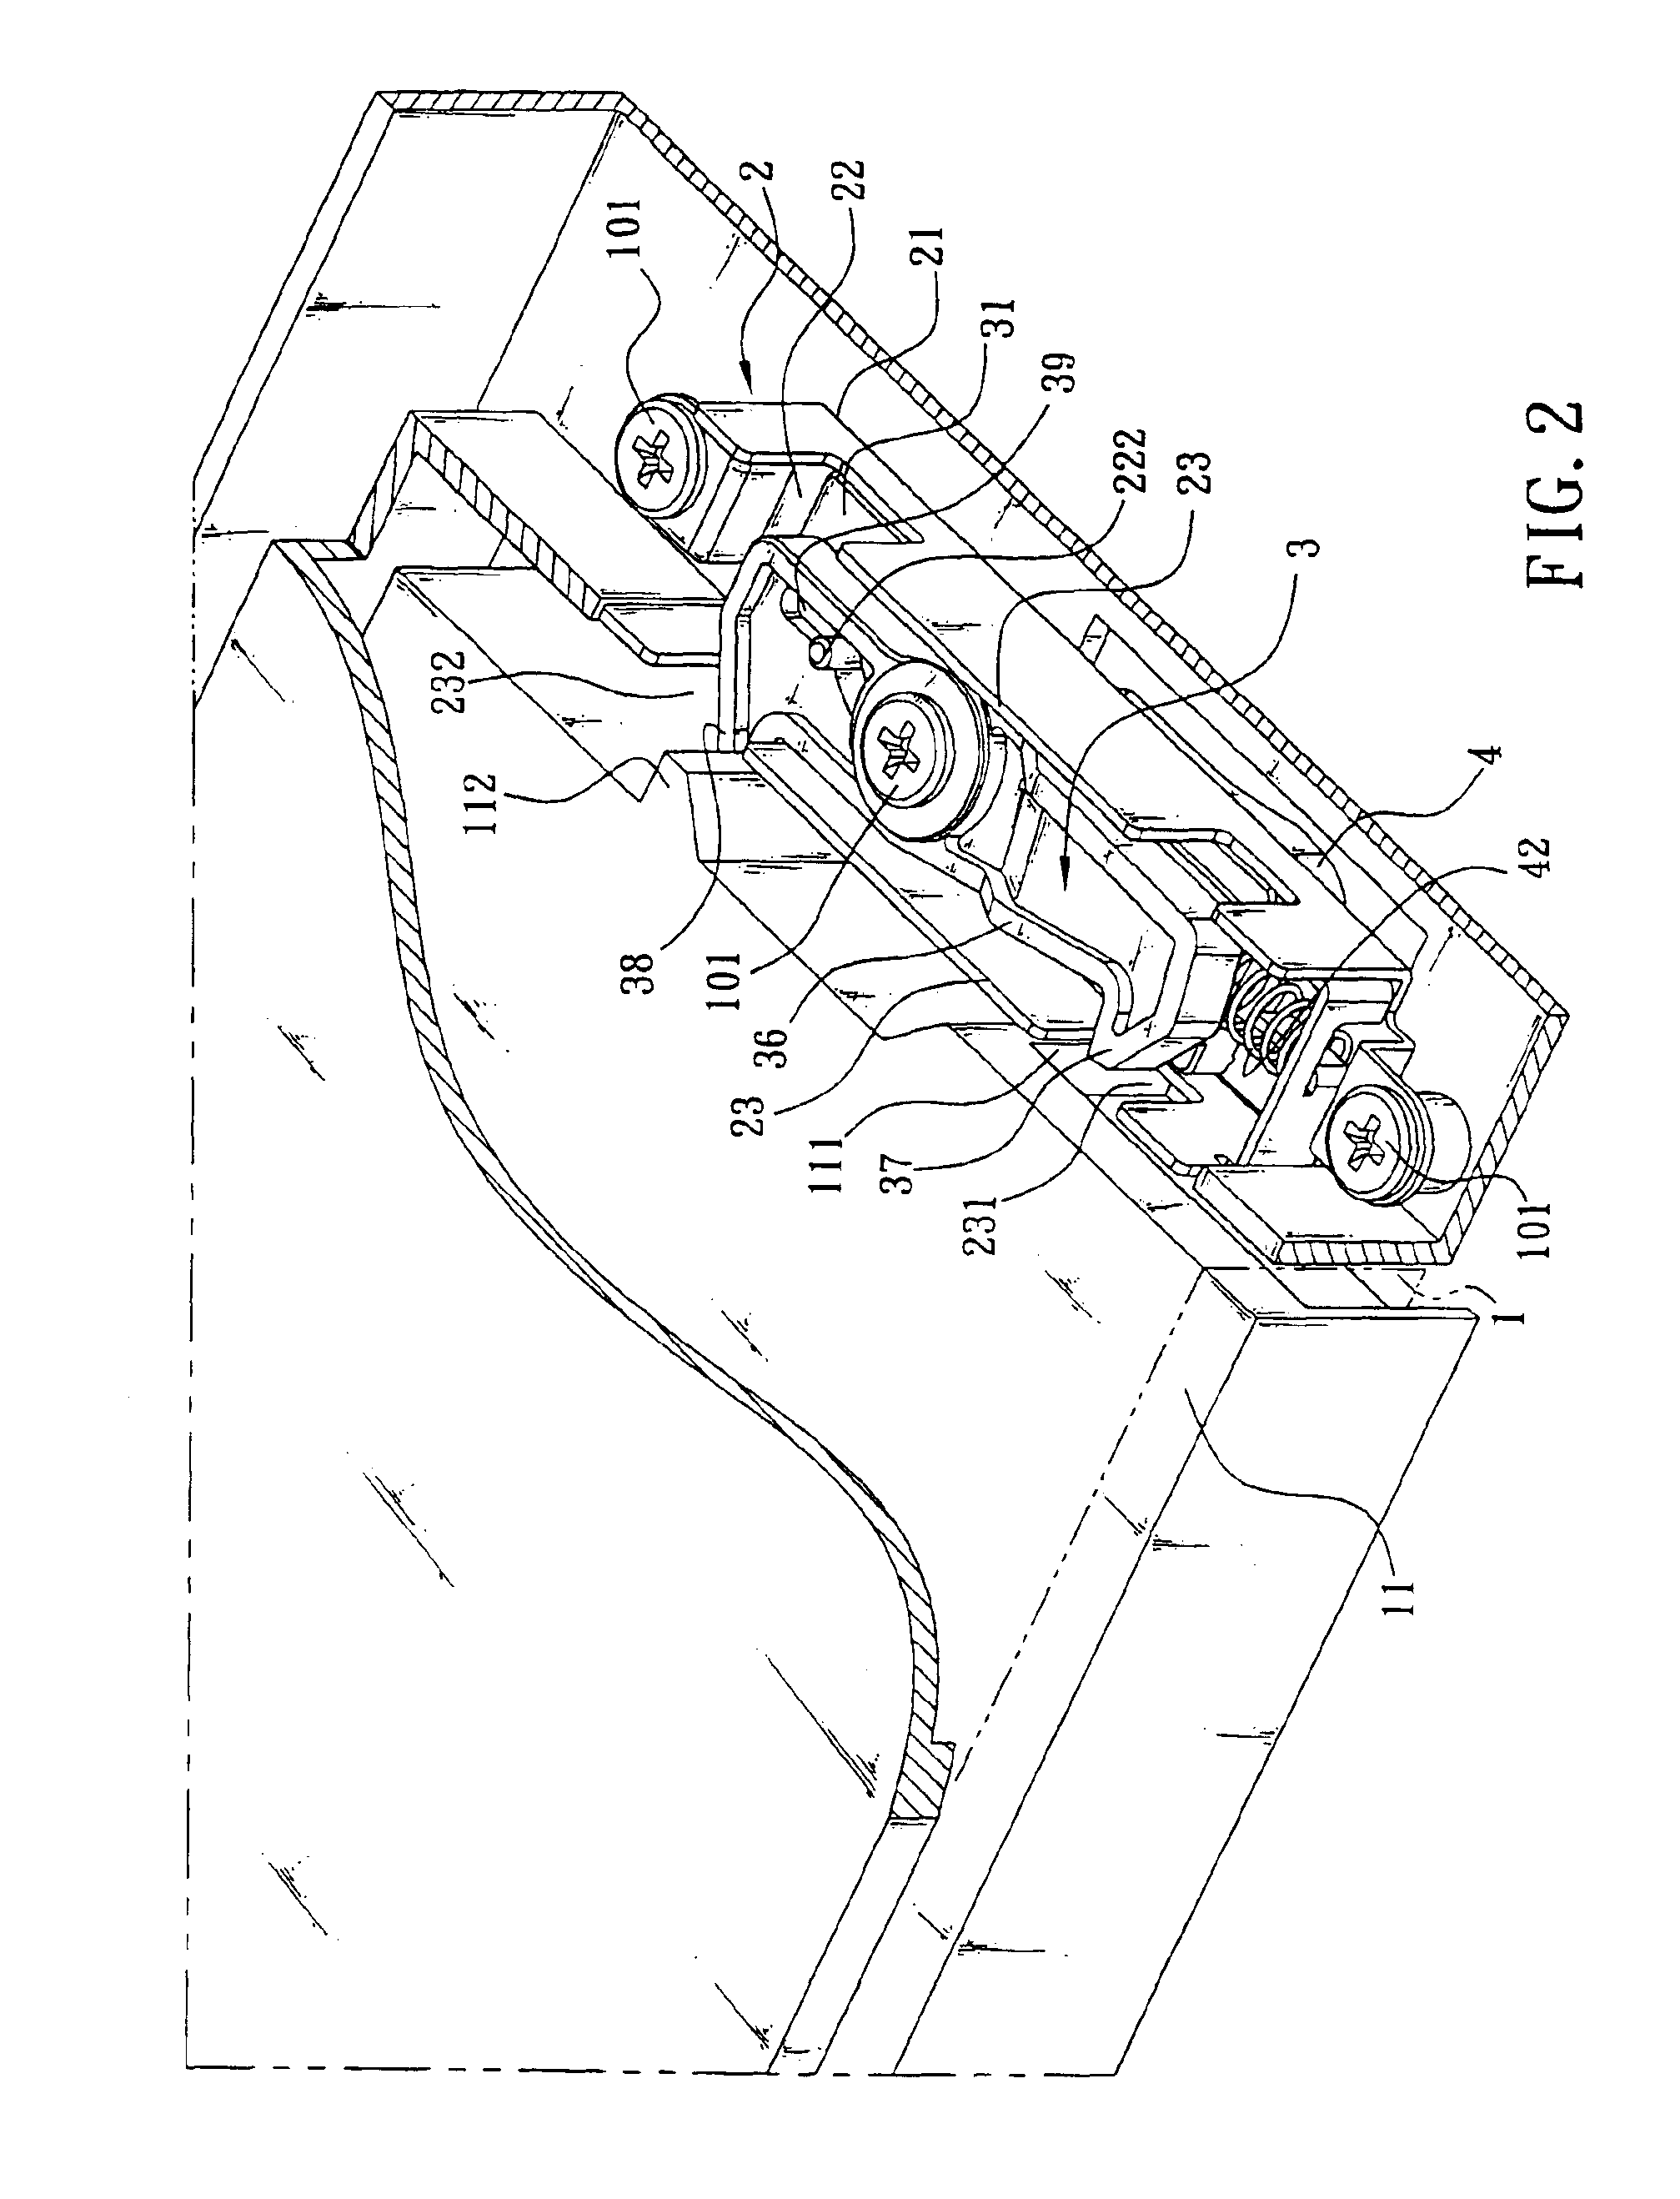 Mechanism for fastening an electronic device in computer by snapping